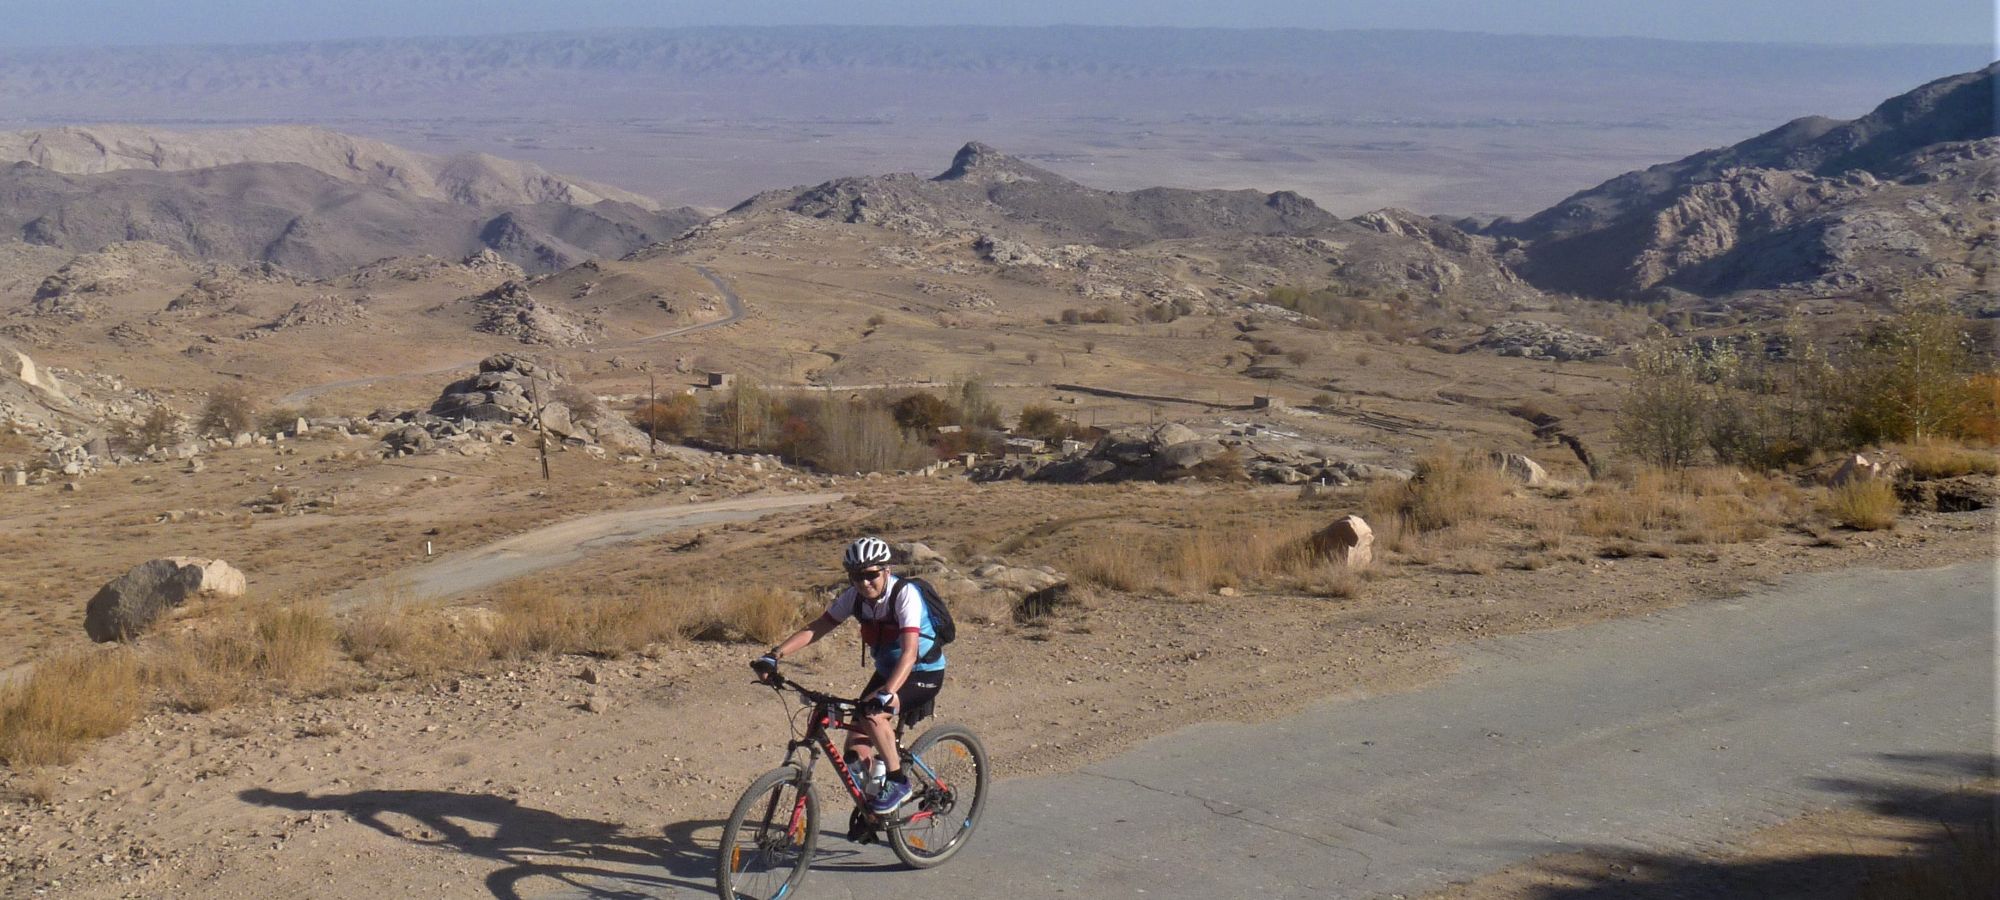 Photos from our Uzbekistan Cycling Holiday